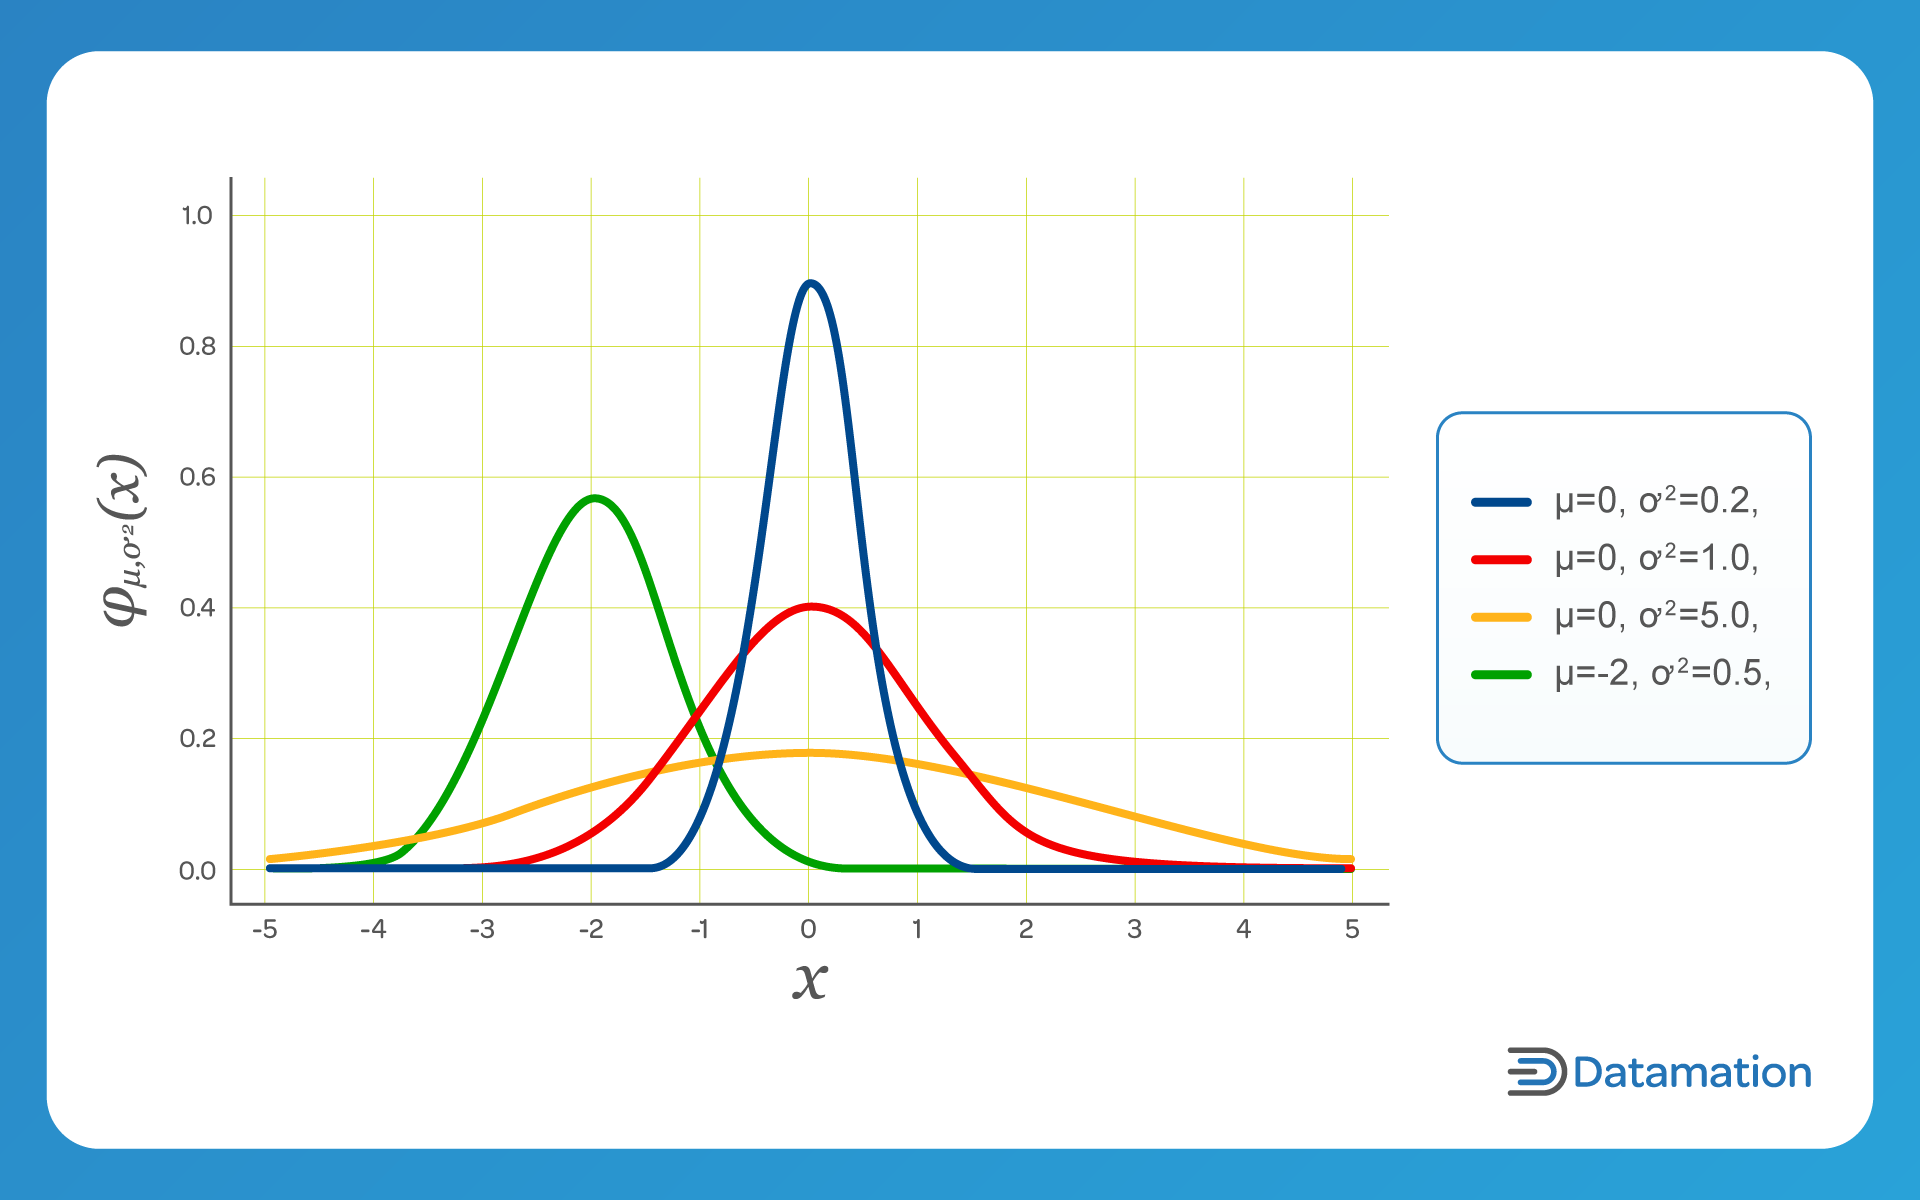 The normal or Gaussian distribution forms the shape of the standard bell-shaped curve.